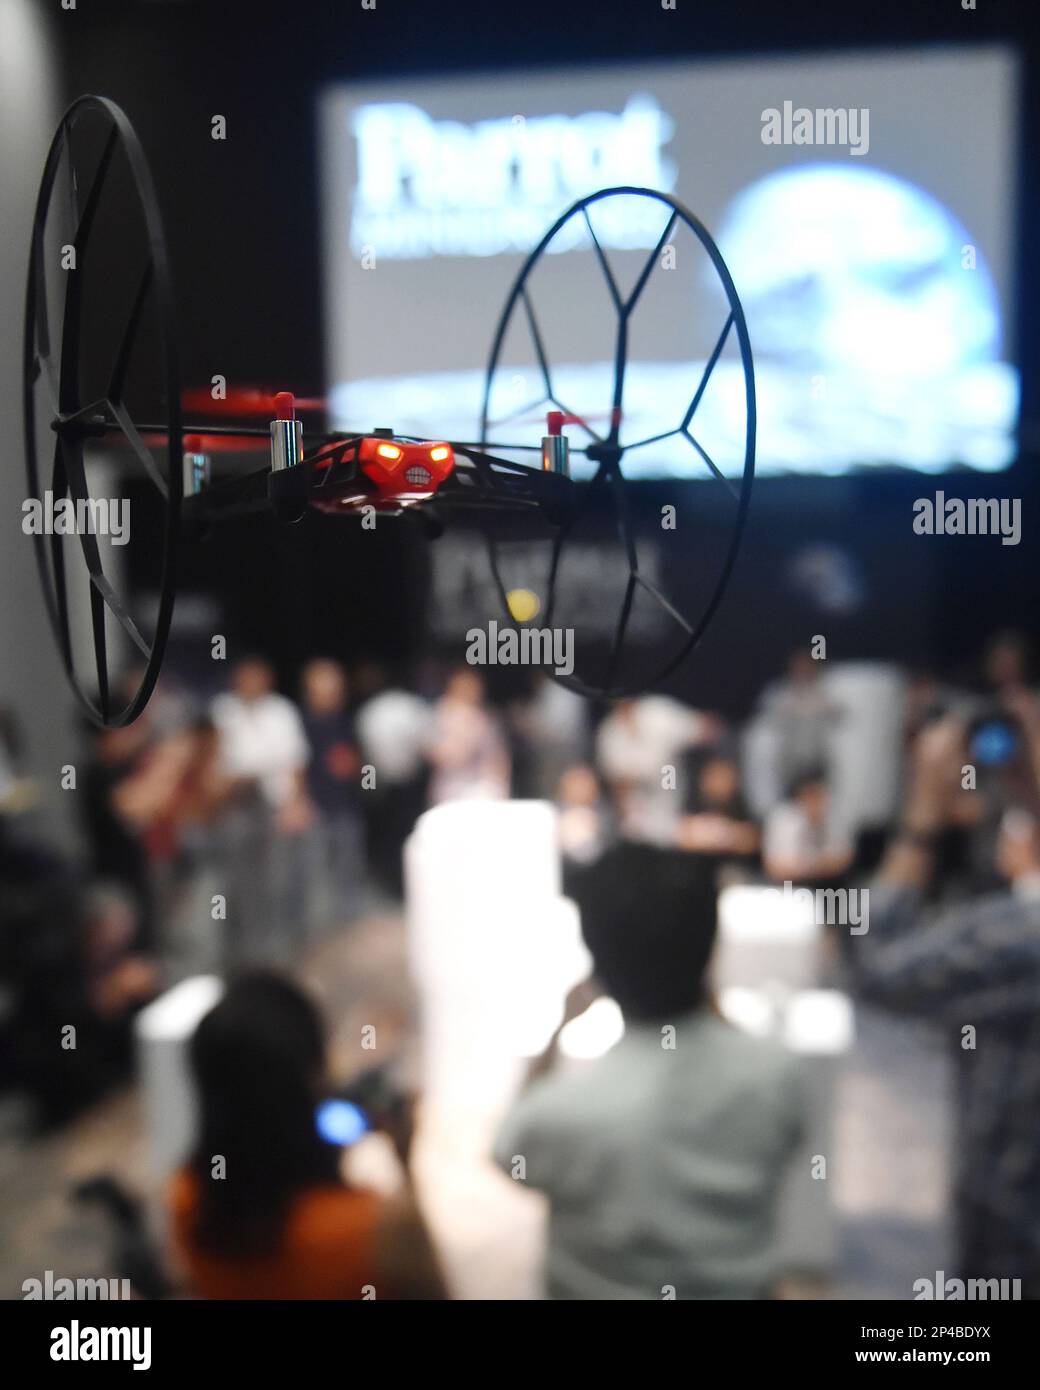 Parrot, a French drone company releases its new micro drones during a pres  conference in Chuo Ward, Tokyo on July 10, 2014. The Rolling Spider and  Jumping Sumo, new drones are controled